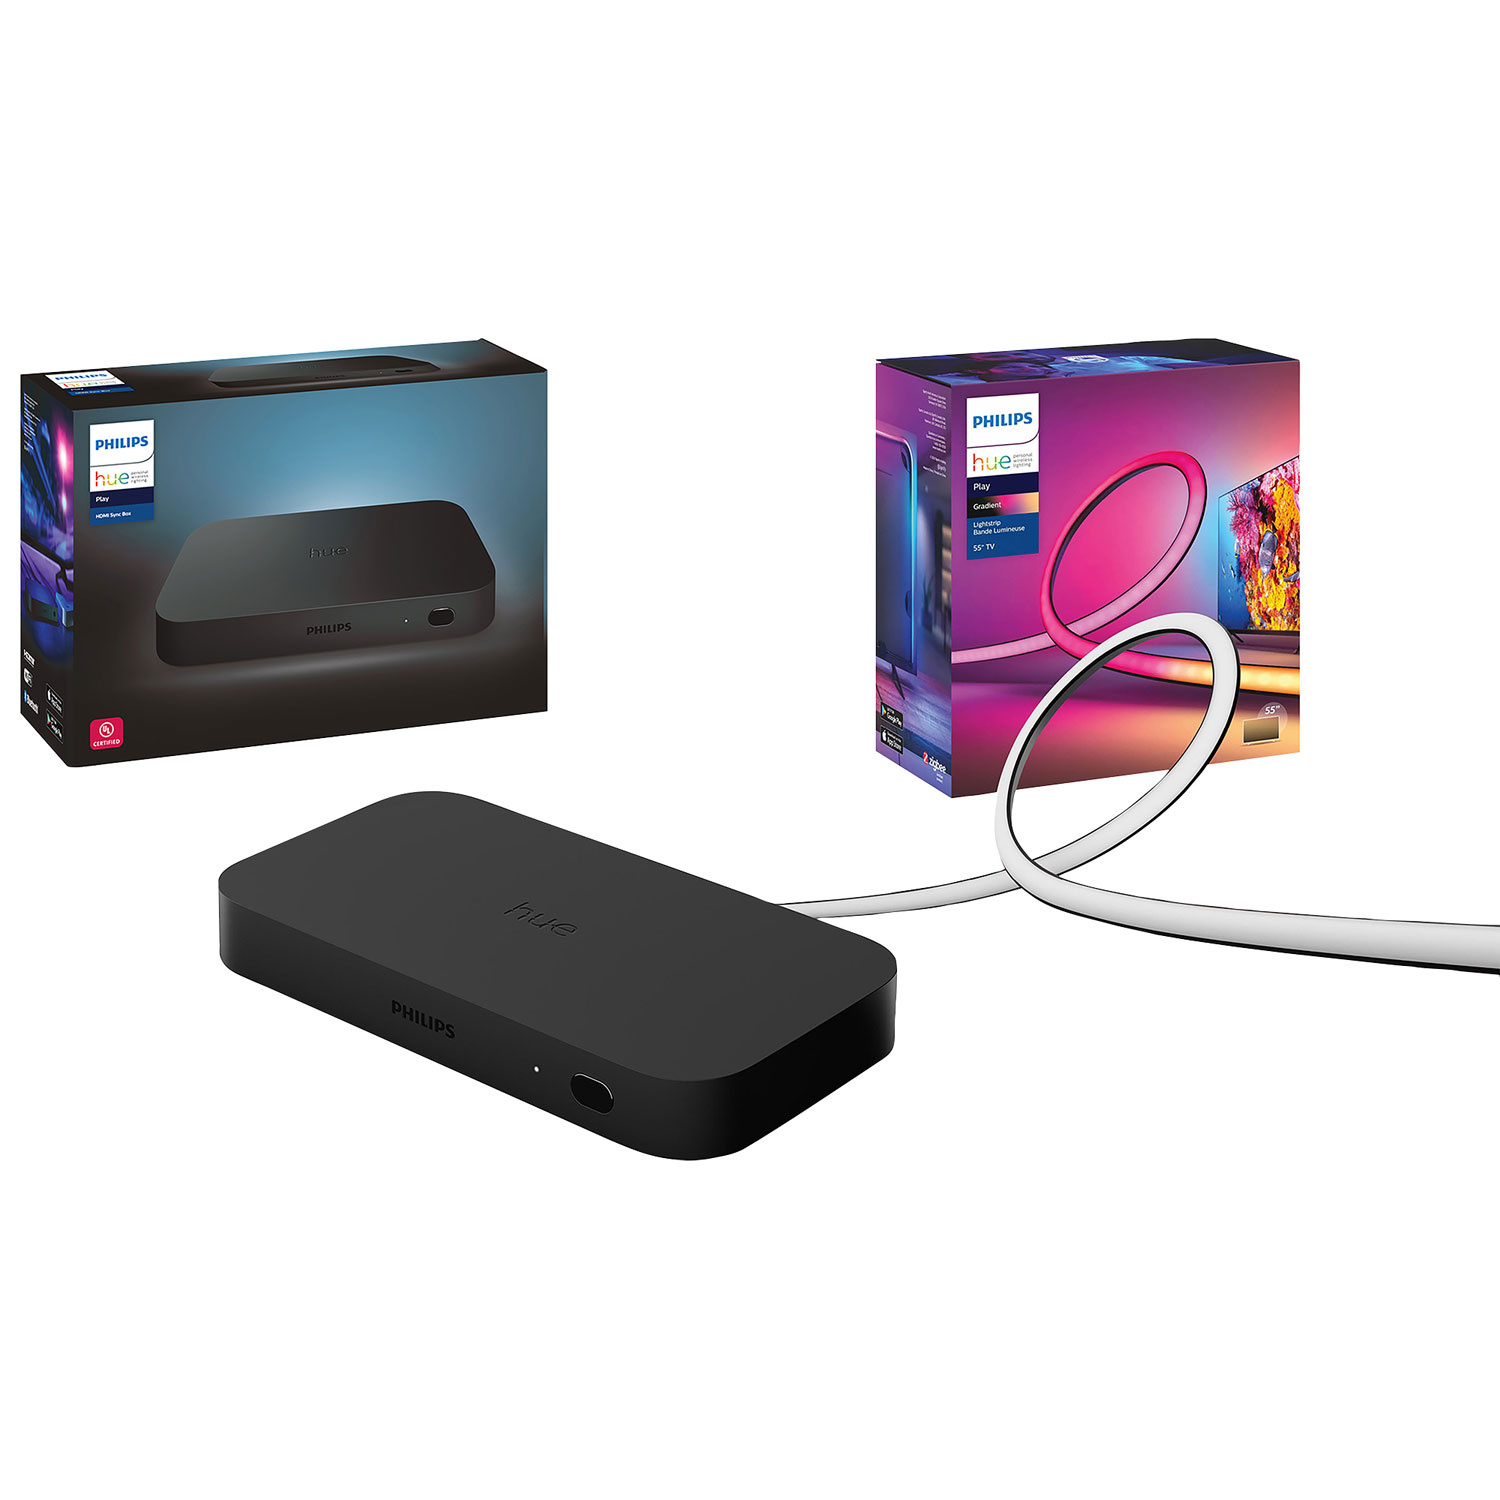 Philips Hue Play HDMI Sync Box Color Coordinates Your Lights and TV Screen